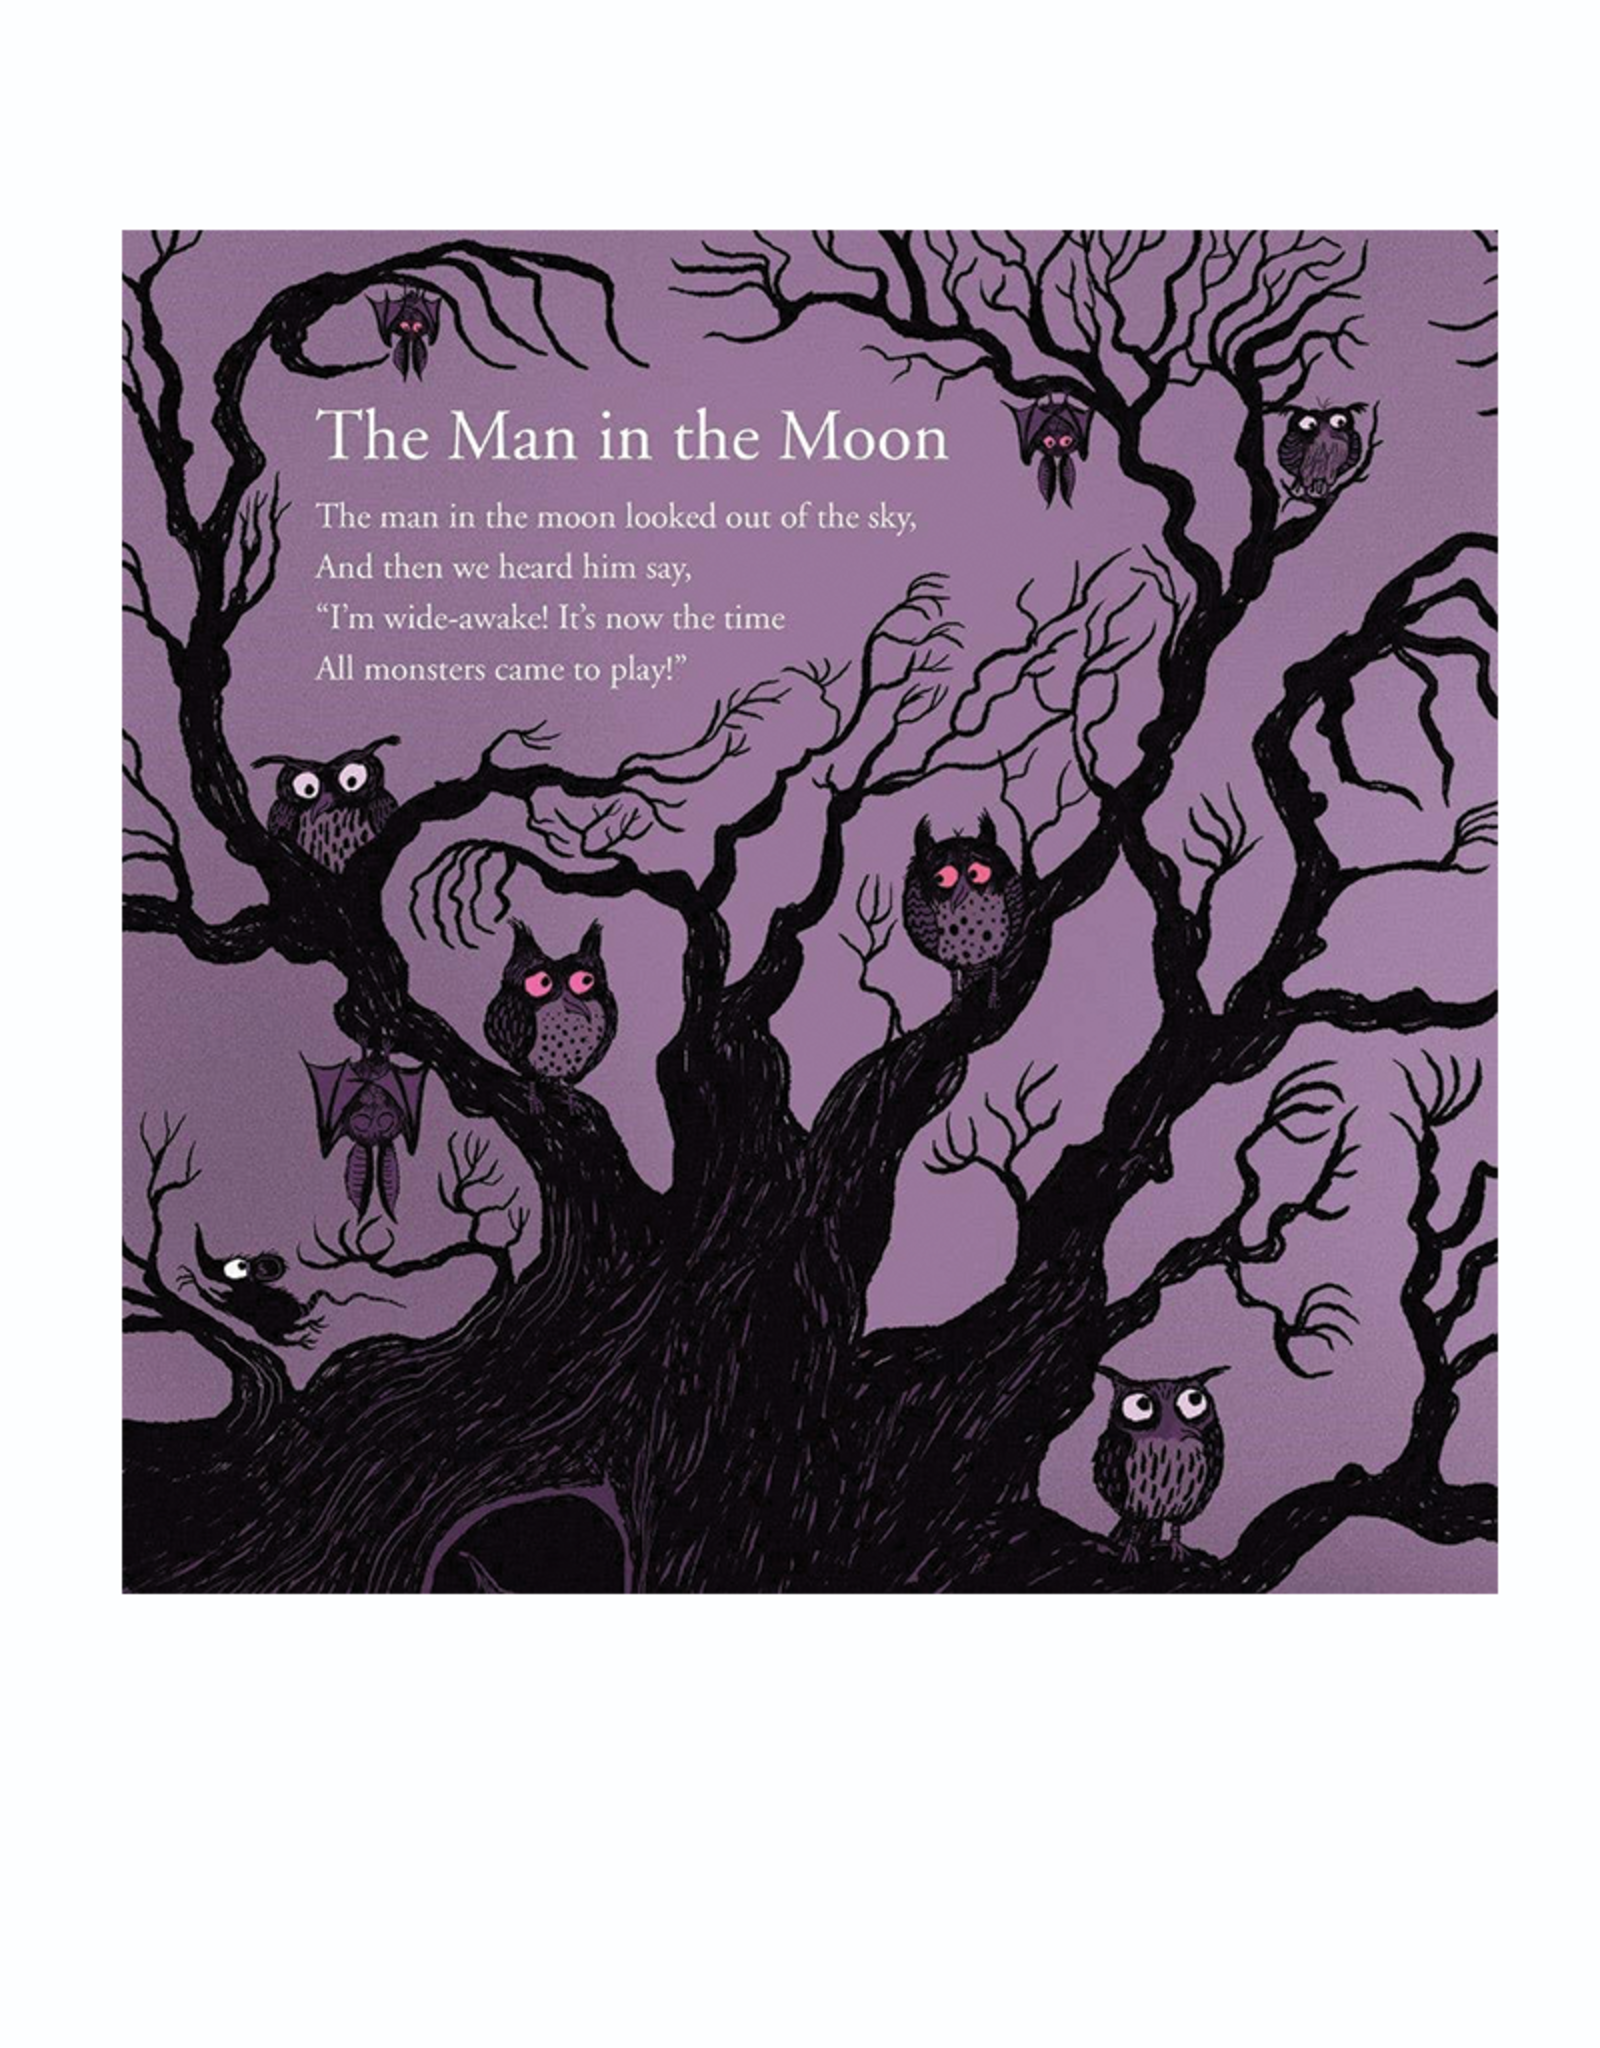 Mother Ghost:  Nursery Rhymes for Little Monsters